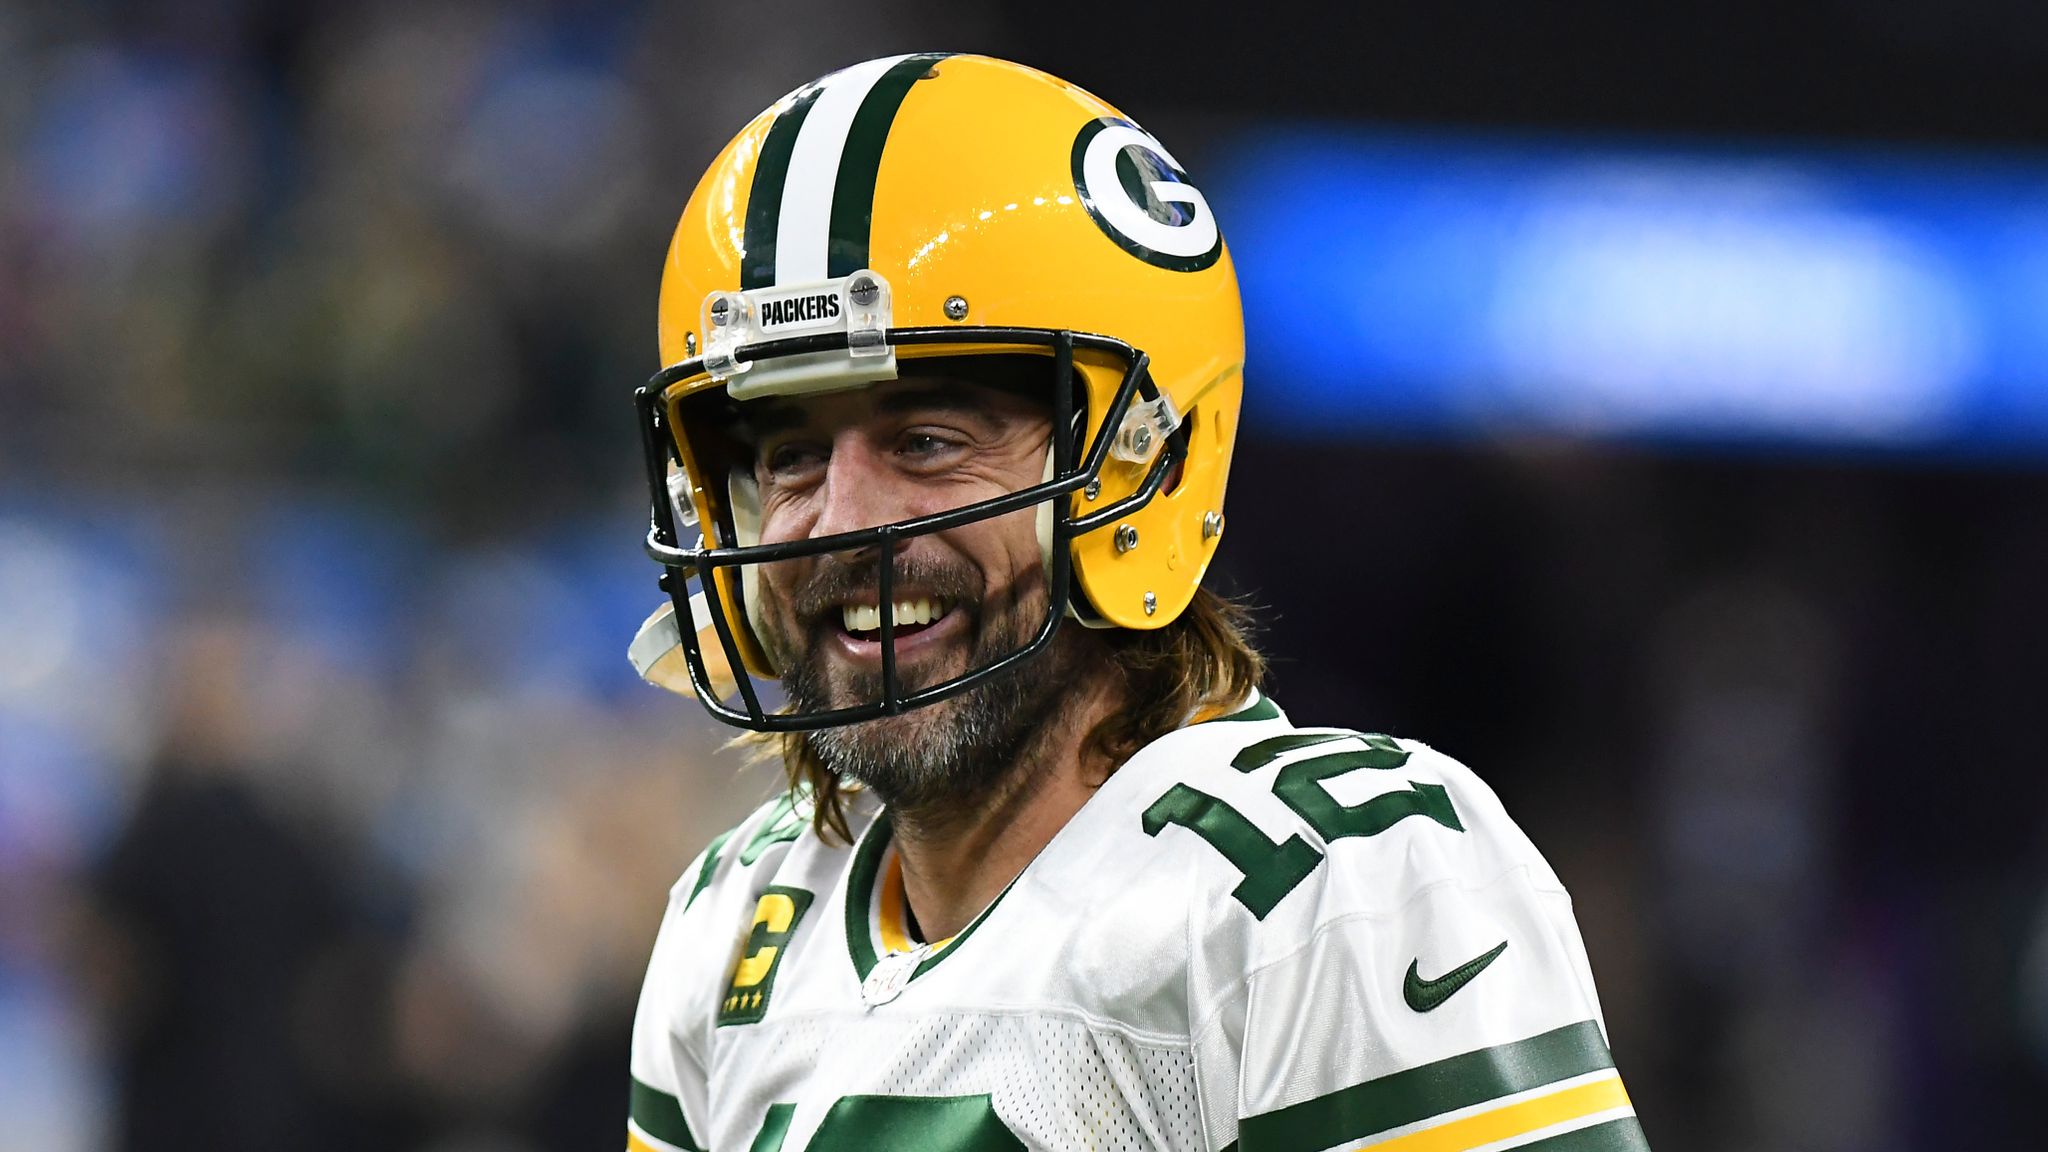 SUNDAY NIGHT FOOTBALL IS AGAIN HOME TO THE BEST & BRIGHTEST IN 2022 – TOM  BRADY VS. PATRICK MAHOMES, AARON RODGERS VS. JOSH ALLEN, BEARS VS. PACKERS,  COWBOYS VS. EAGLES AND MORE